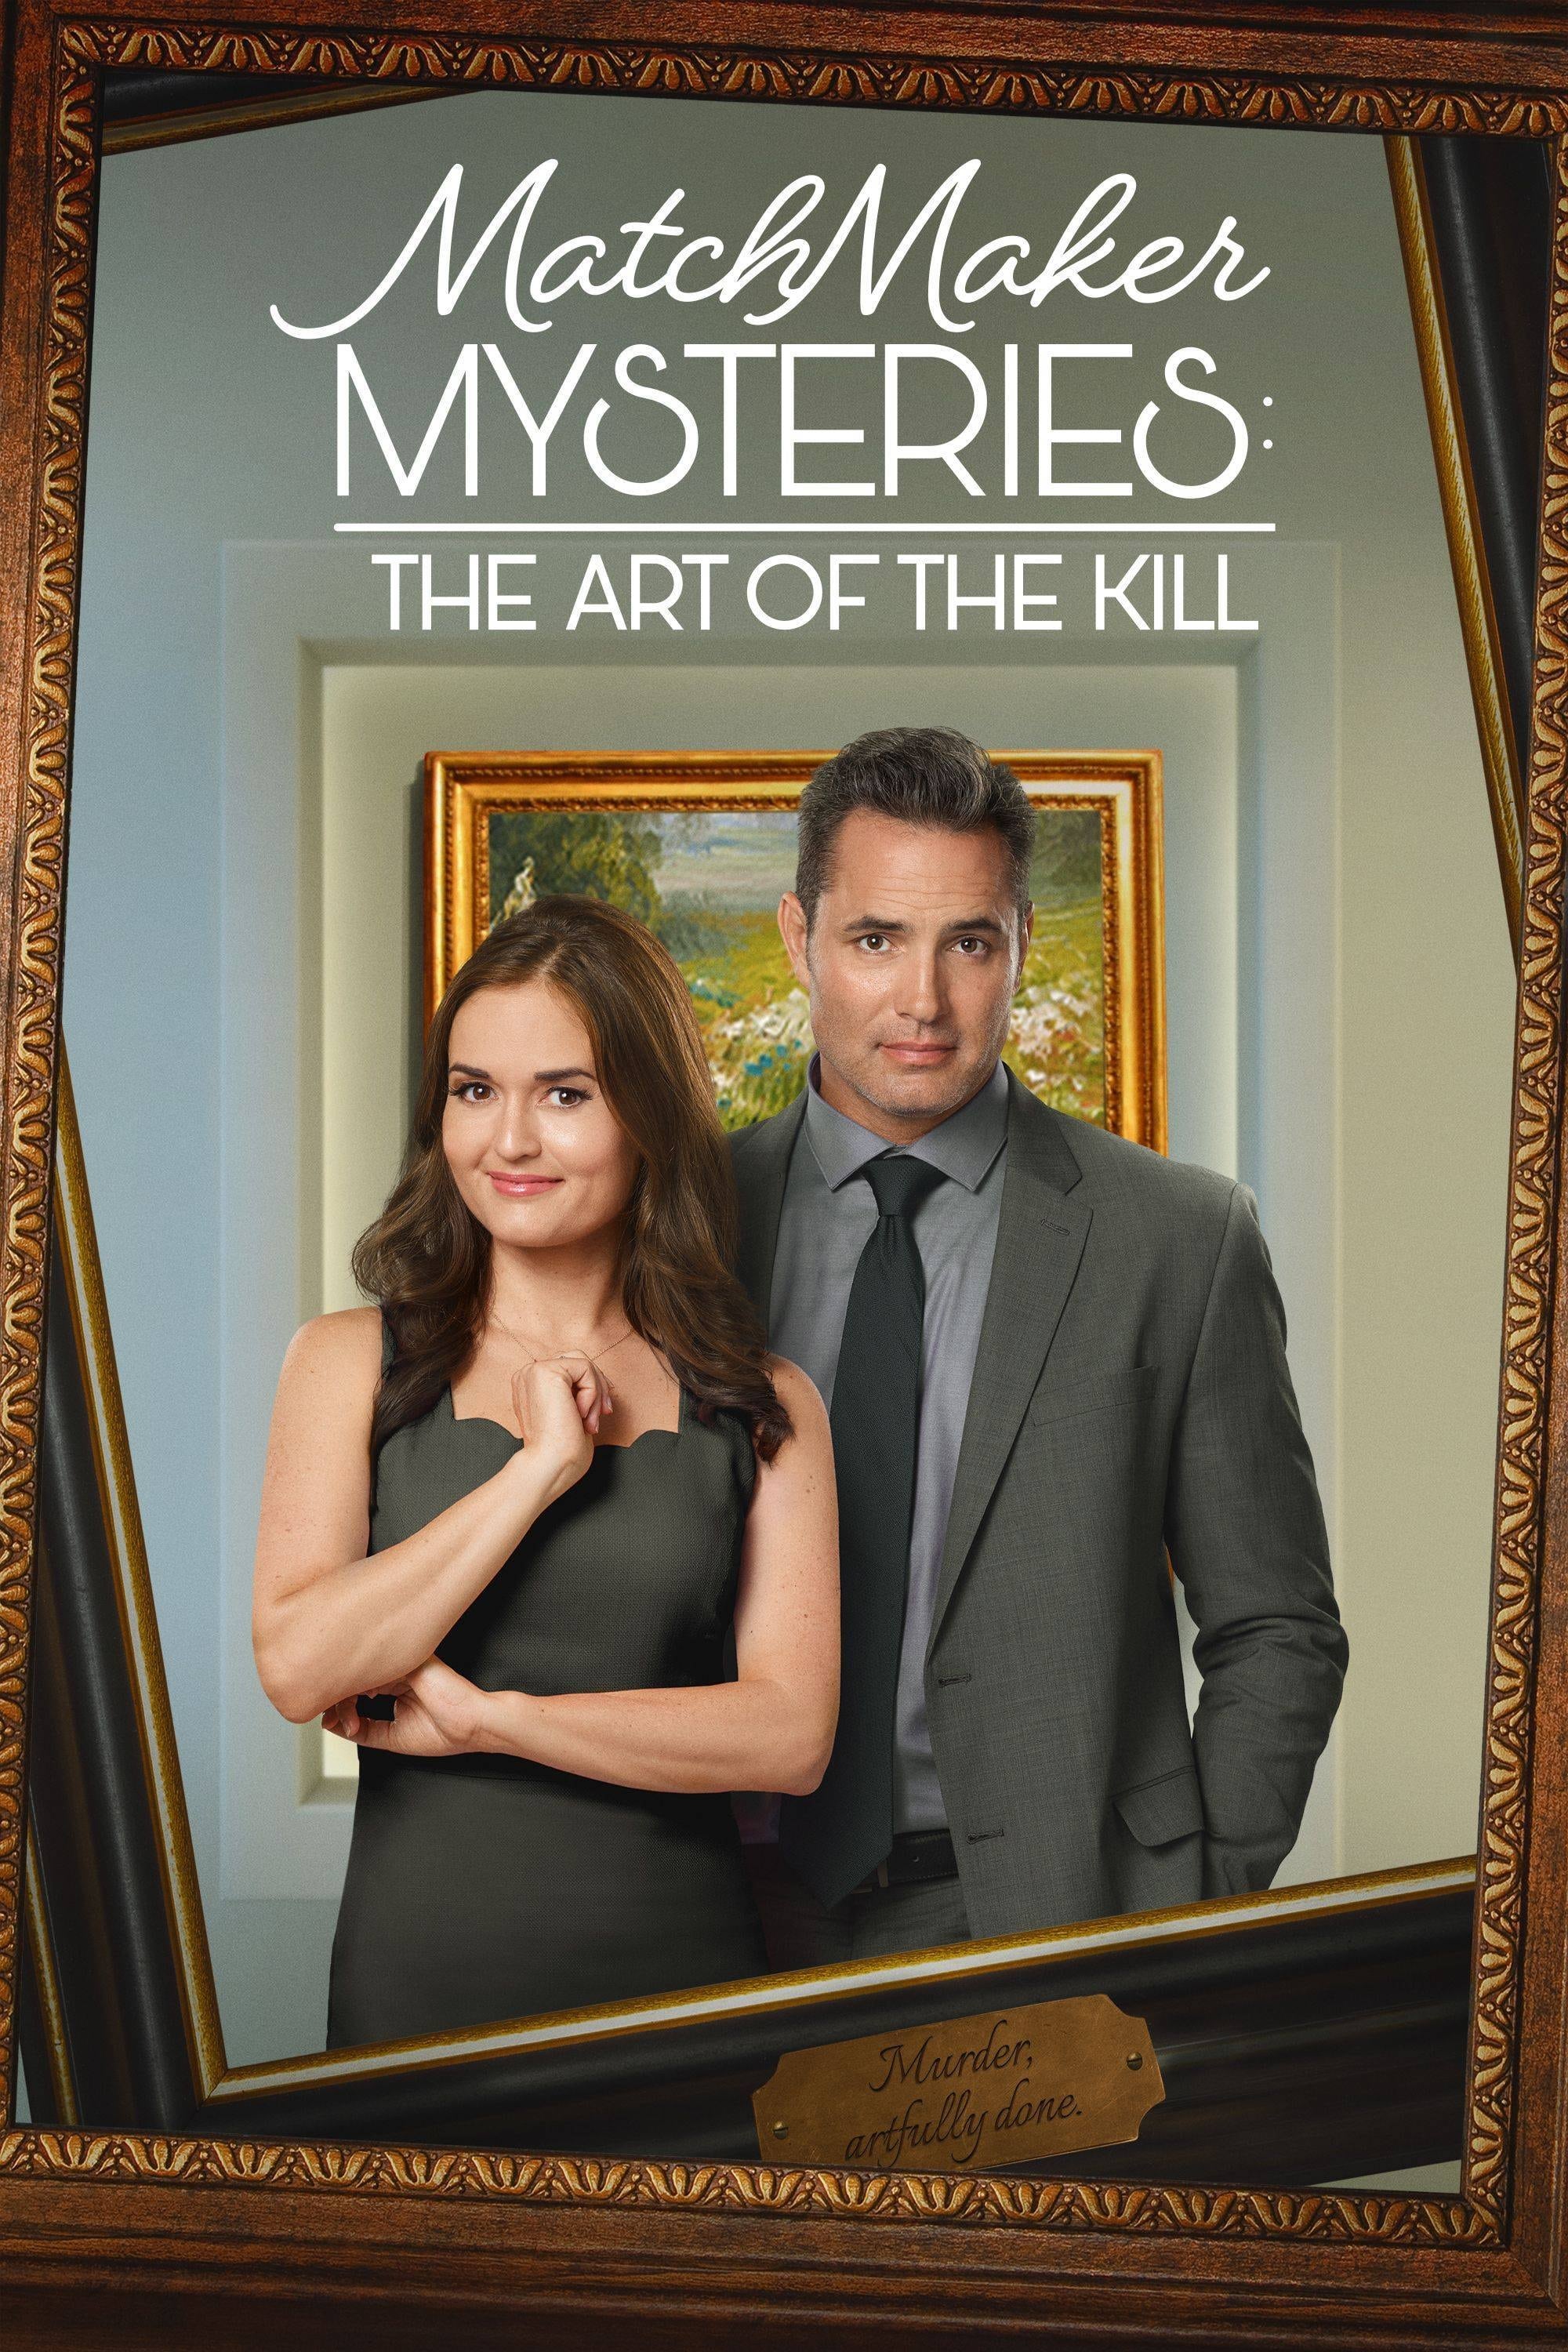 MatchMaker Mysteries: The Art of the Kill